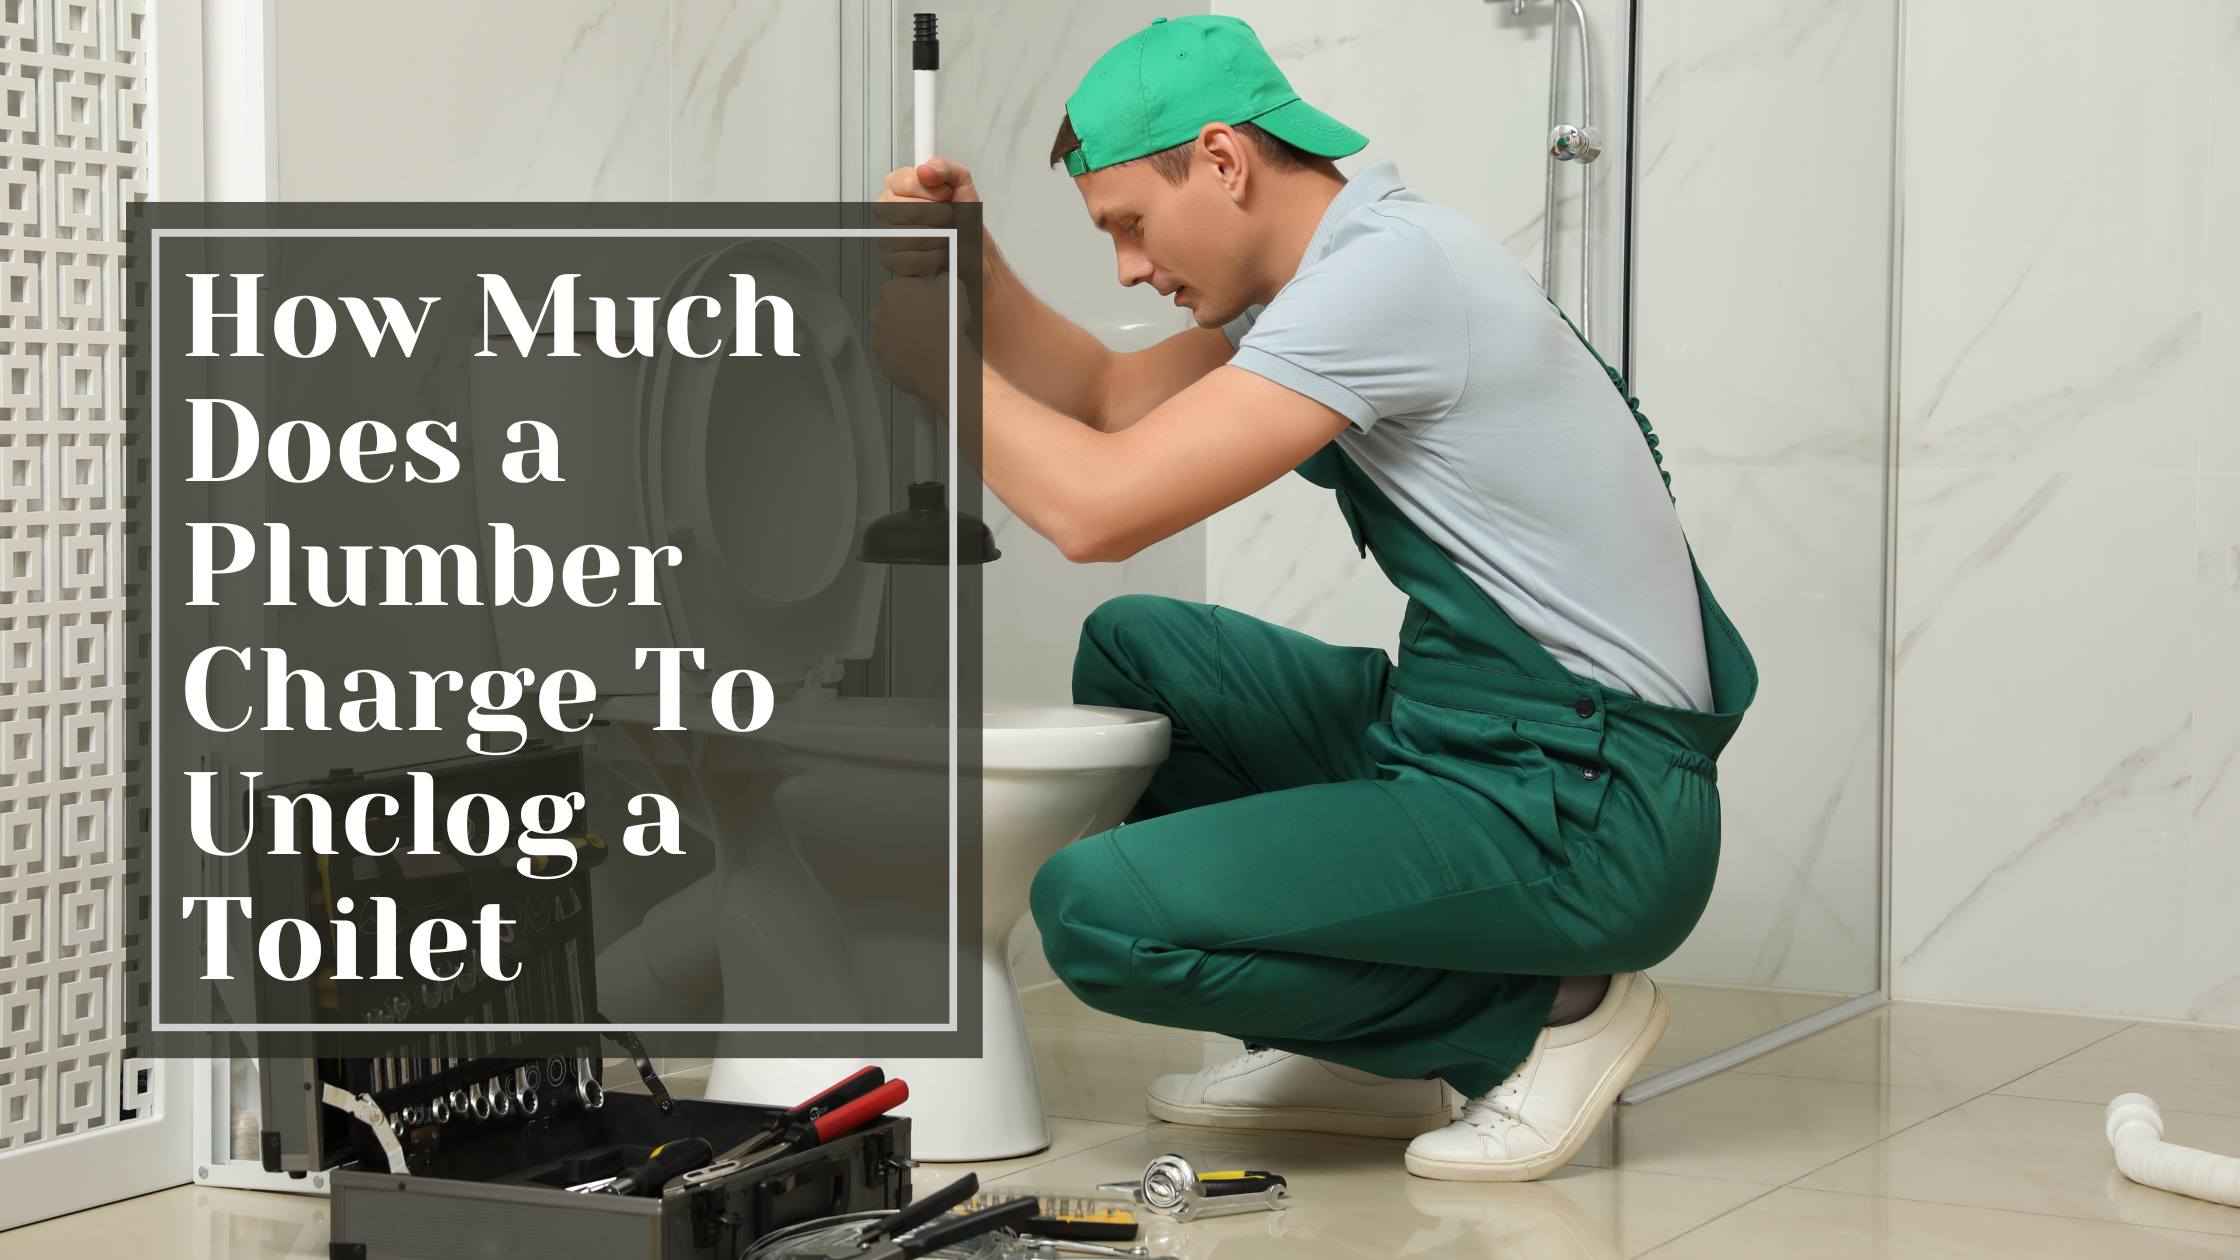 How Much Does a Plumber Charge To Unclog a Toilet